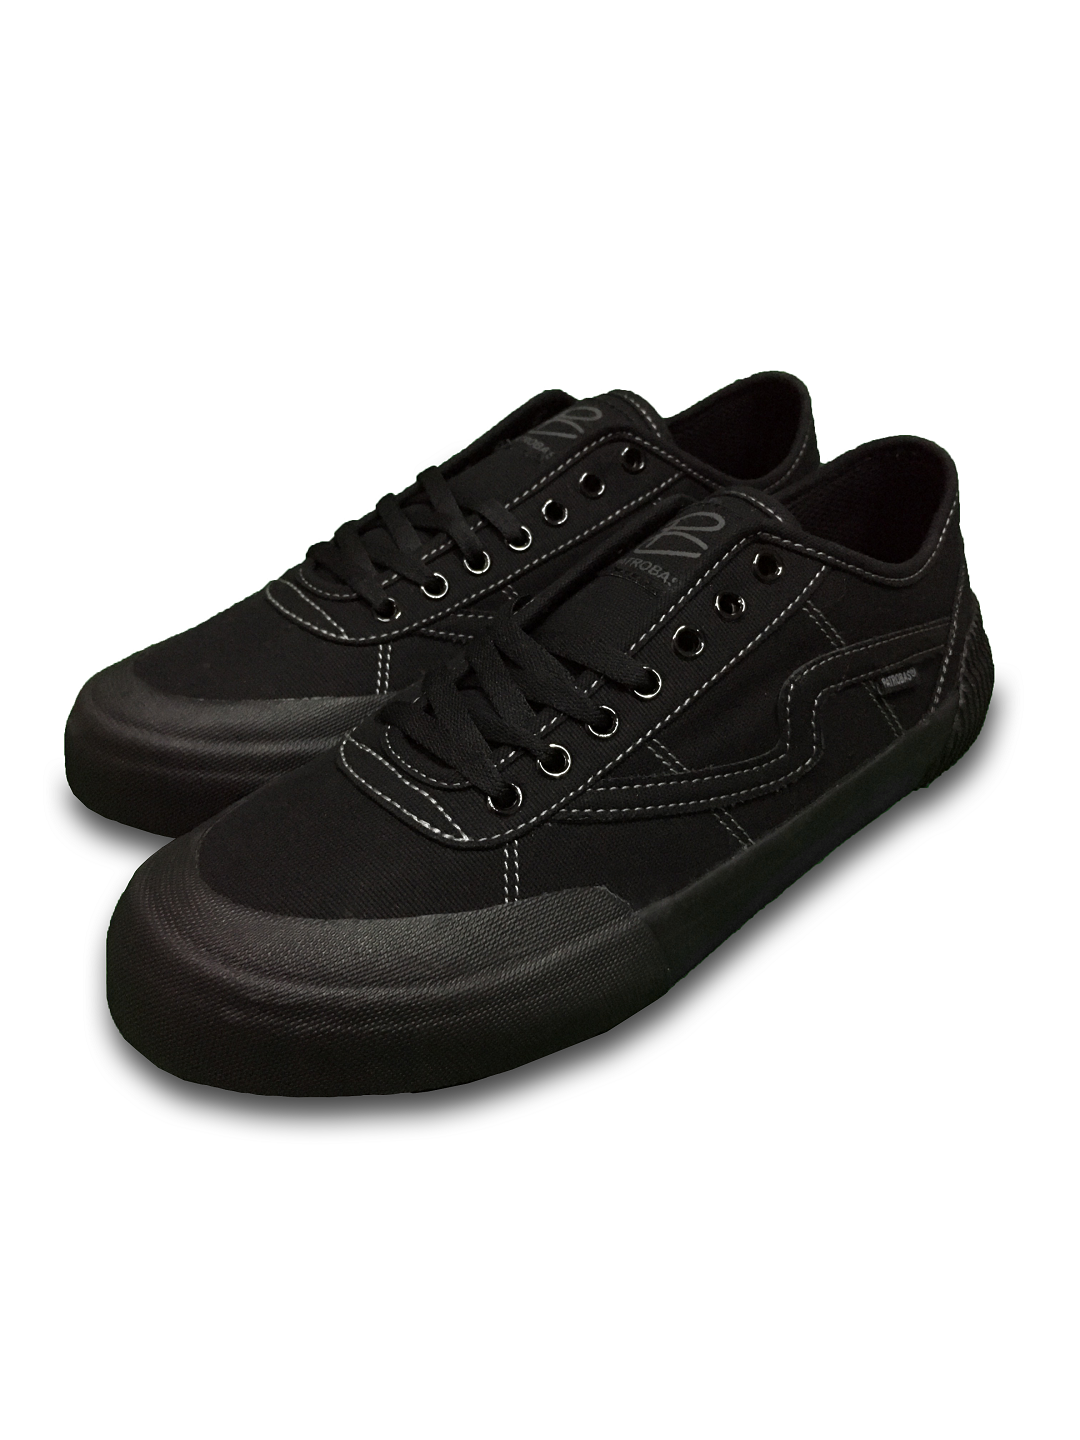 Equip All Black Sneakers